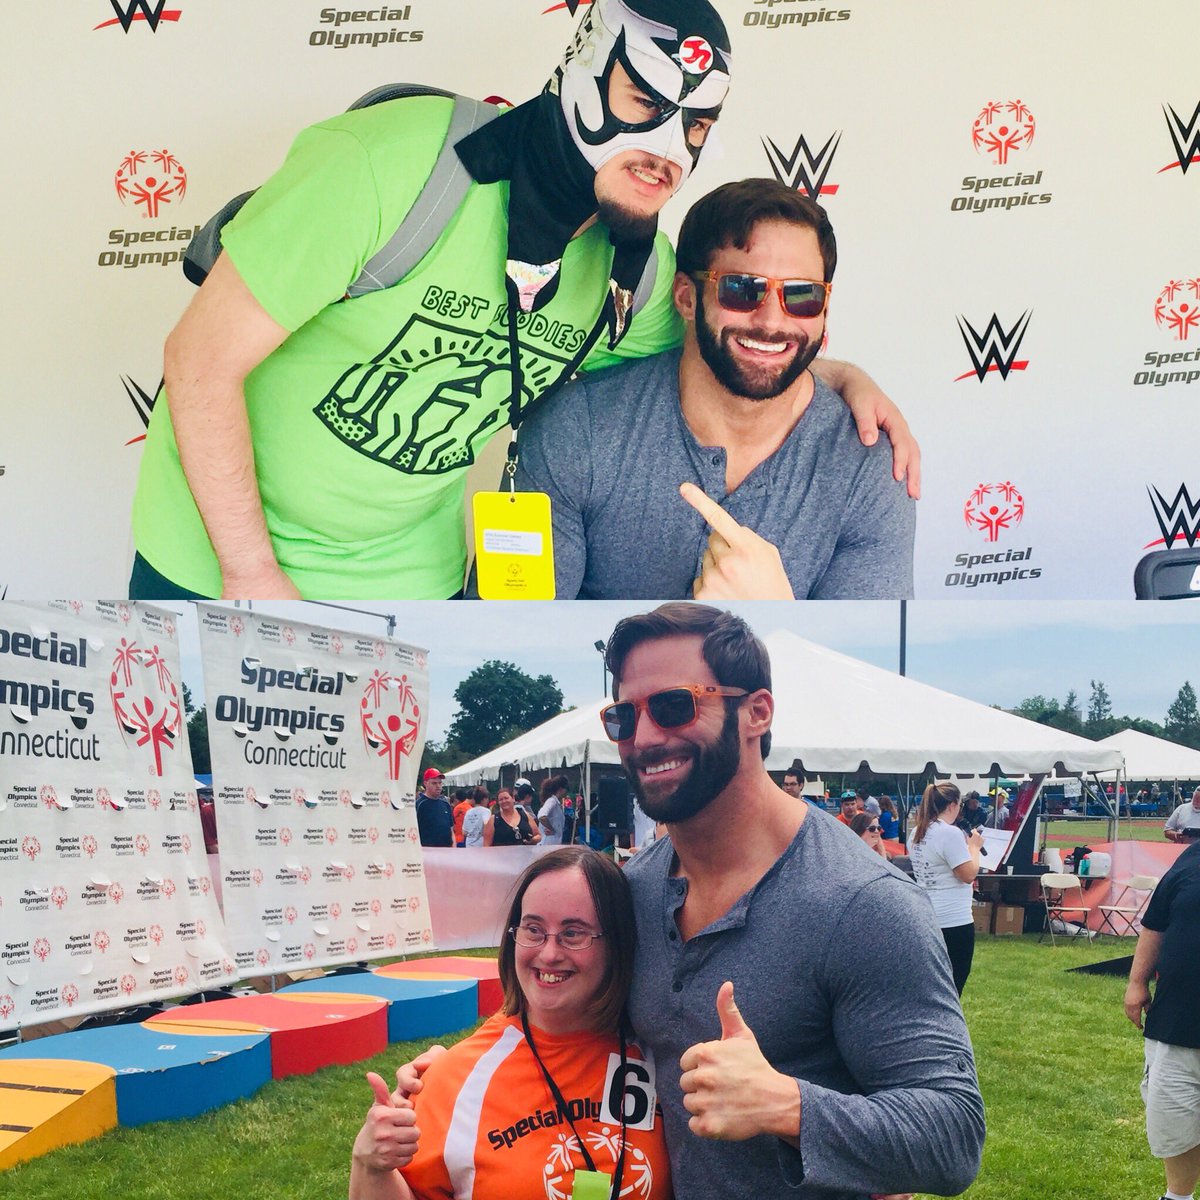 Had a great time meeting all of the athletes today at @SOCTconnecticut #SOCTSummerGames! @specialolympics @wwecommunity #WWEHero